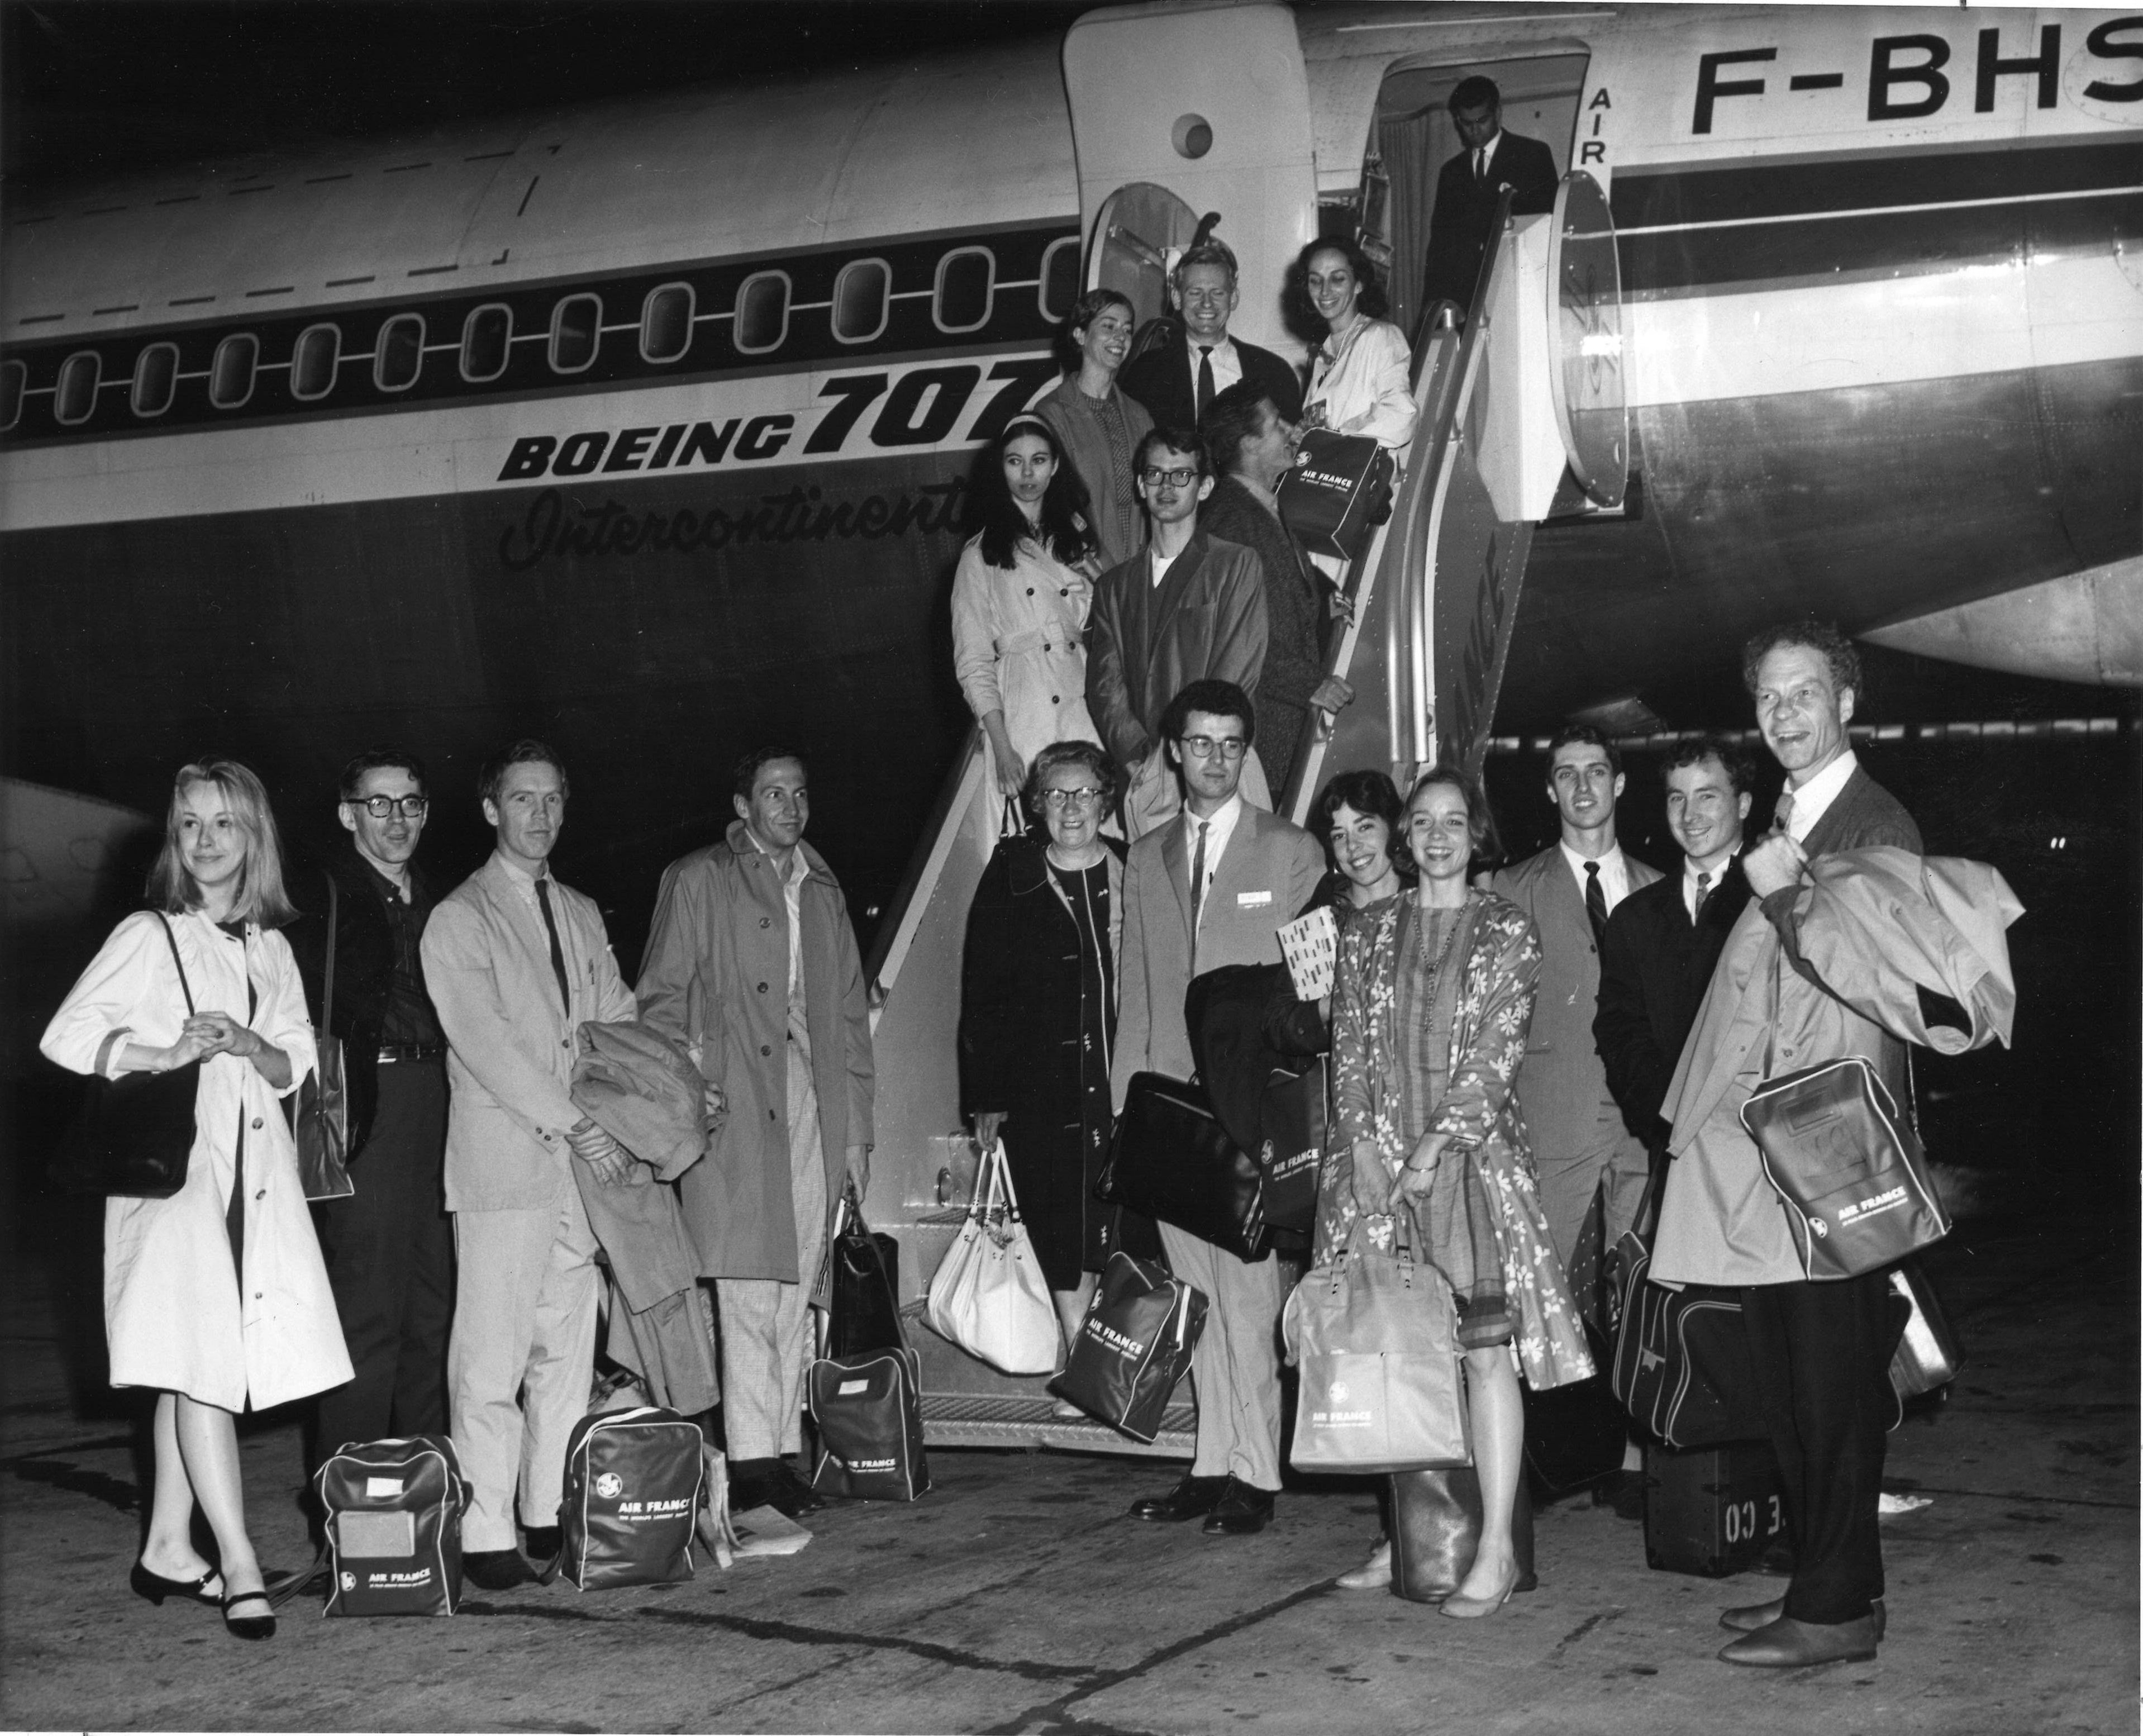 A grinning Merce Cunningham, holding a coat and travel bag, stands with his company by the boarding steps to a Boeing 707. The women wear dresses, the men ties.